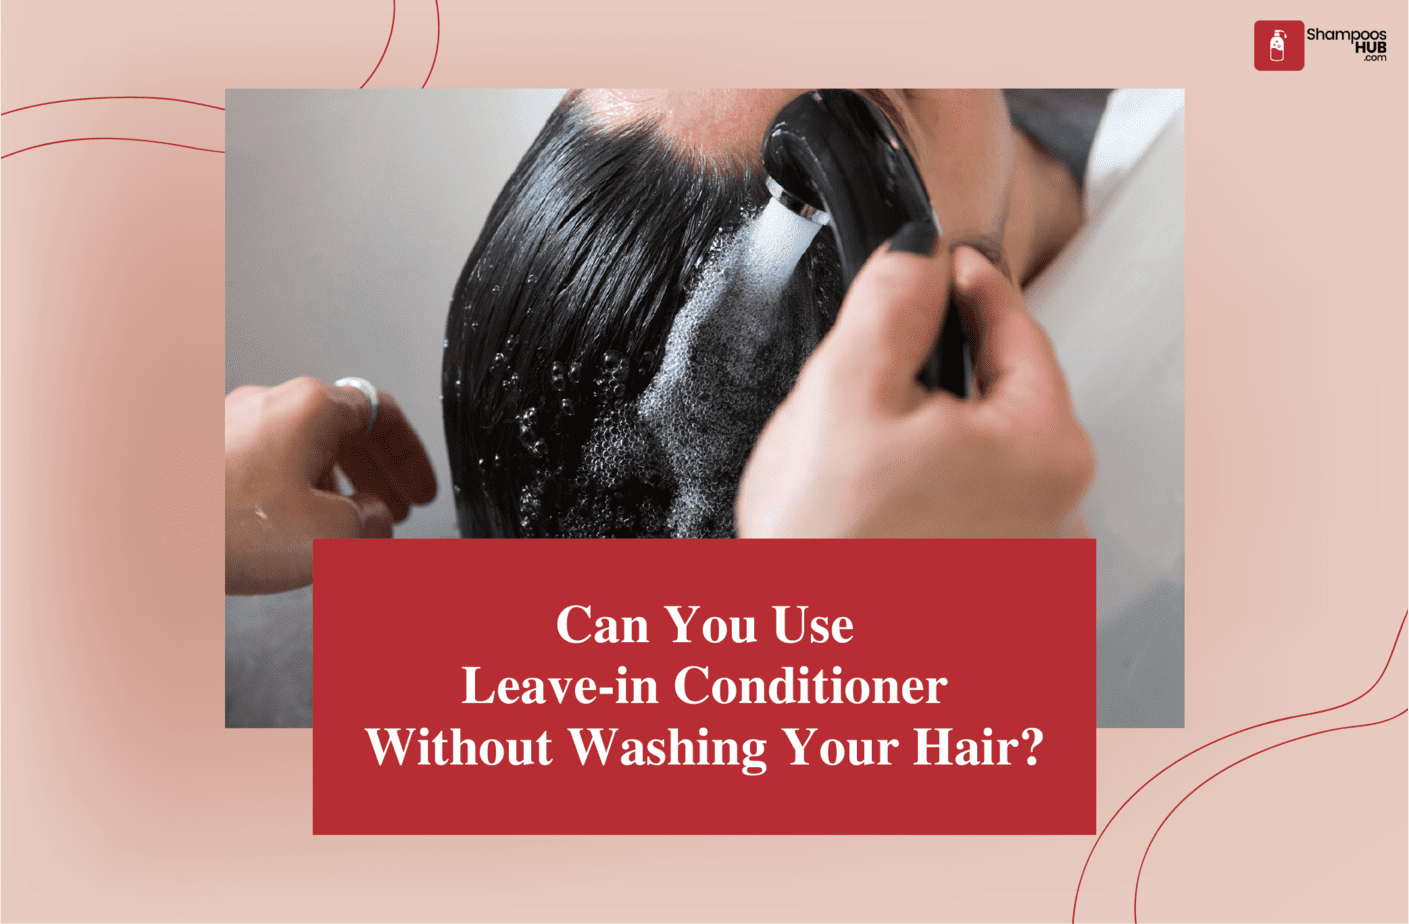 Can You Use Leave-in Conditioner Without Washing Your Hair?